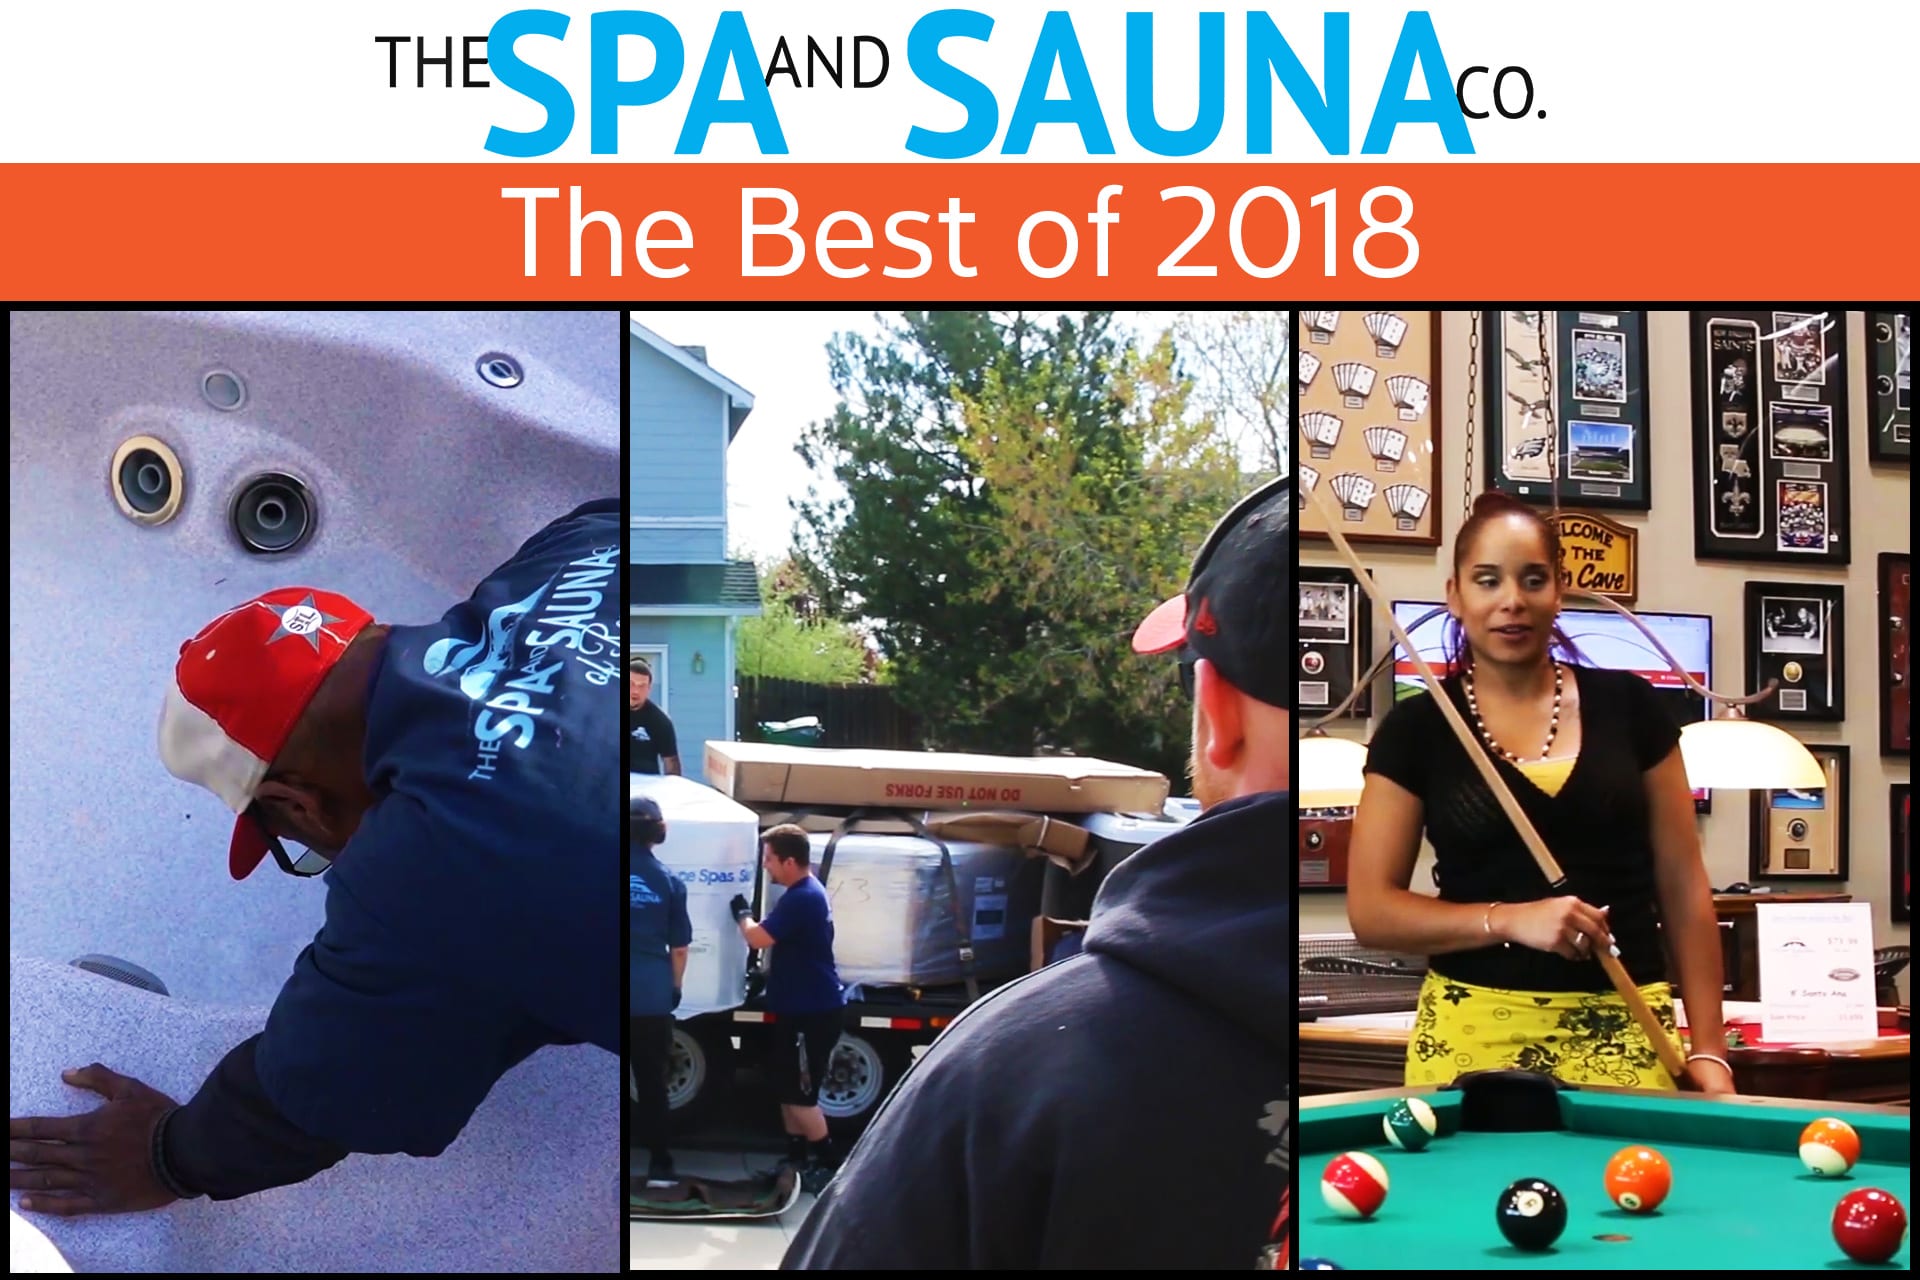 Best of The Spa and Sauna Company in 2018